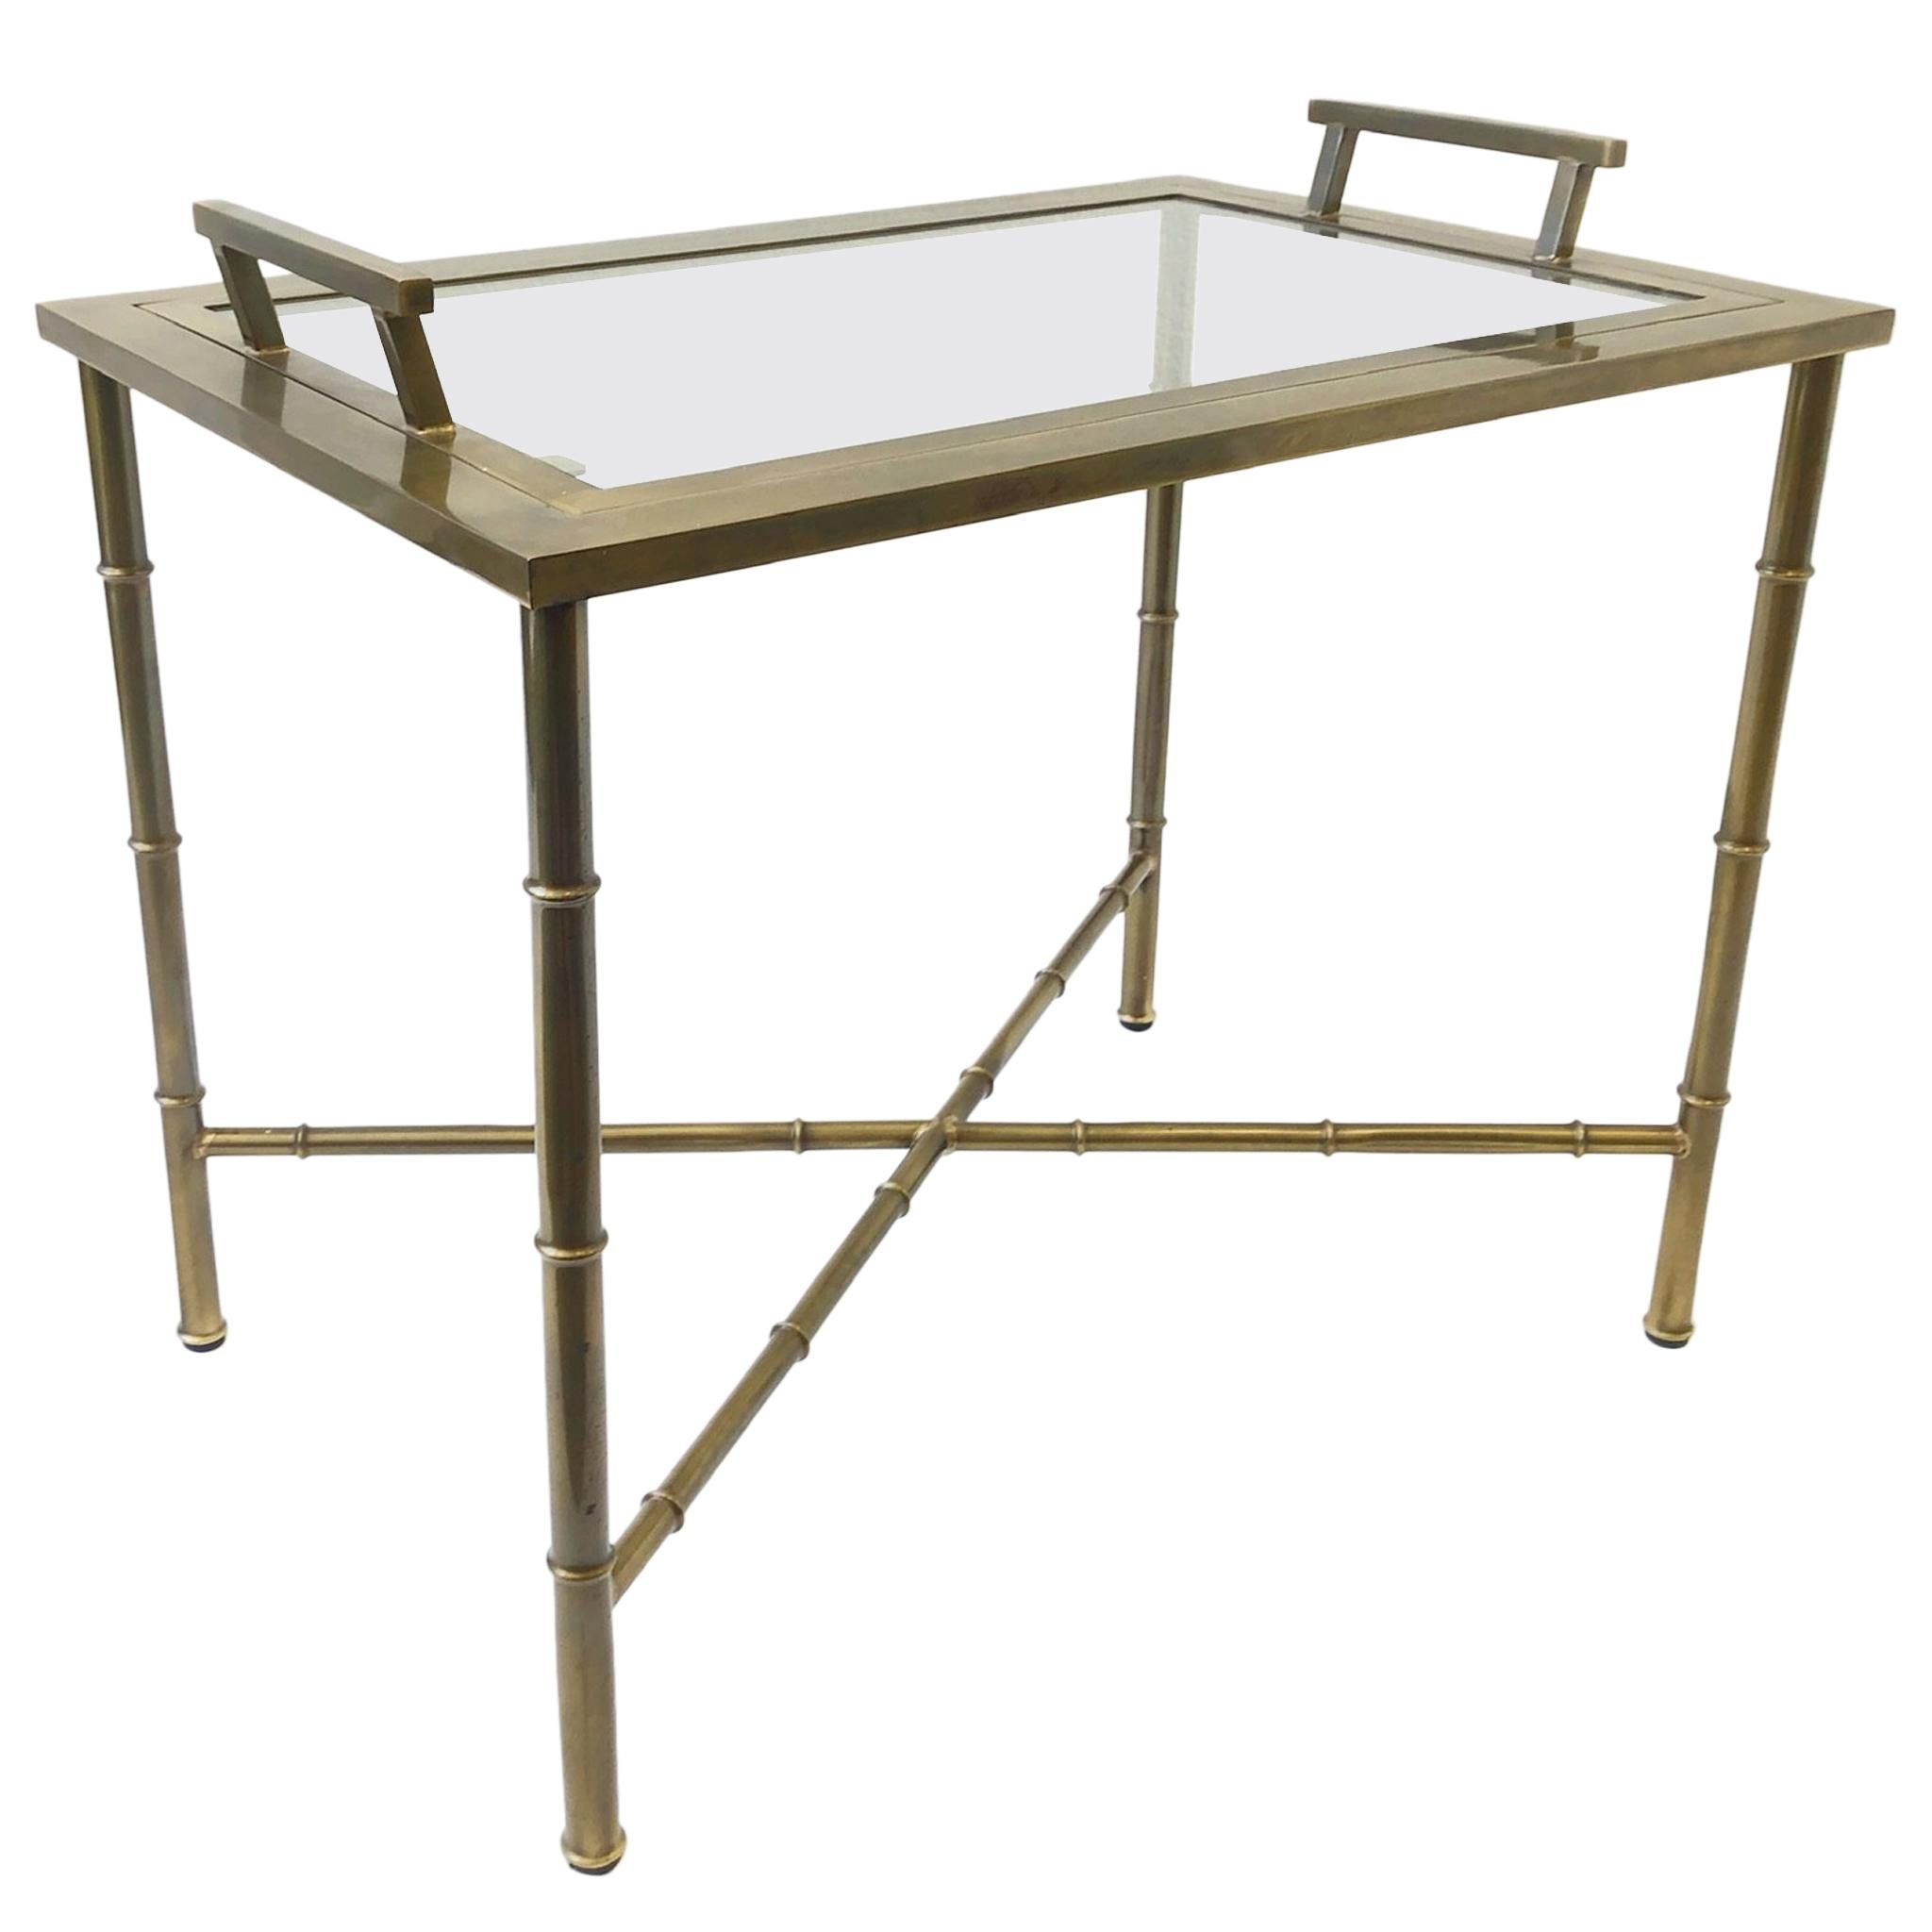 Aged Brass and Glass Faux Bamboo Tray Table by Mastercraft